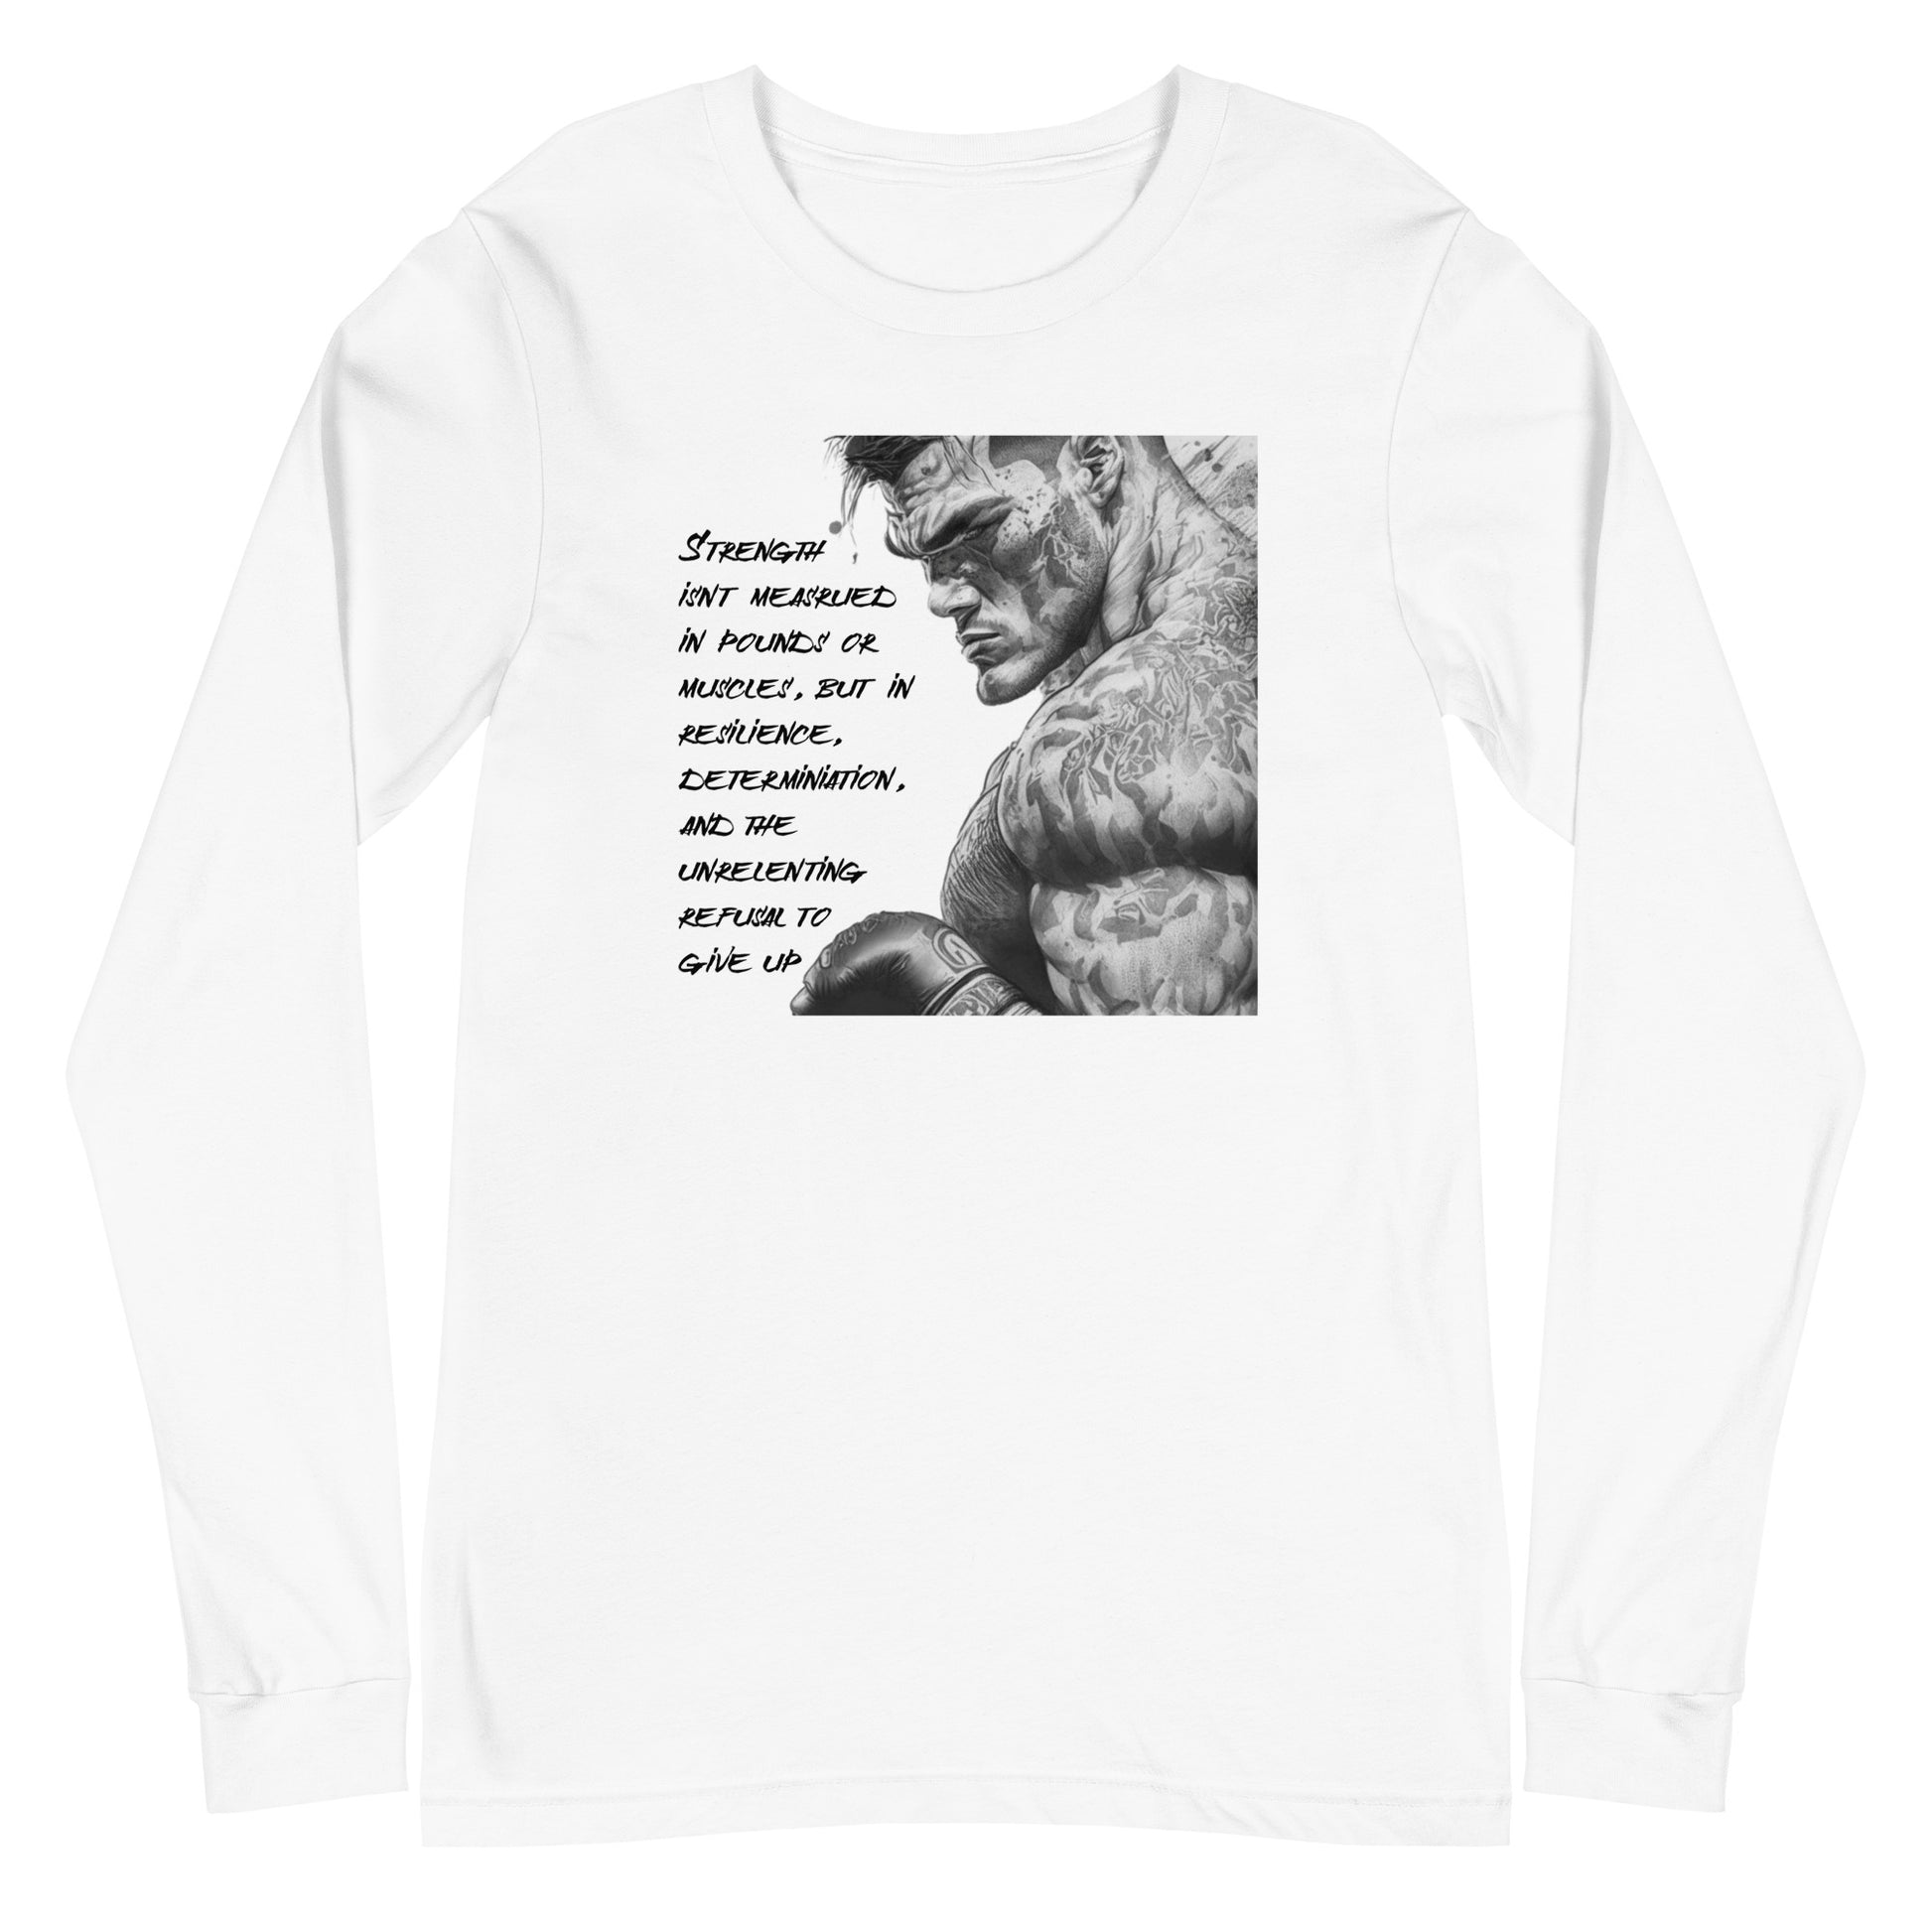 Strength and Determination Men's Long Sleeve Tee White